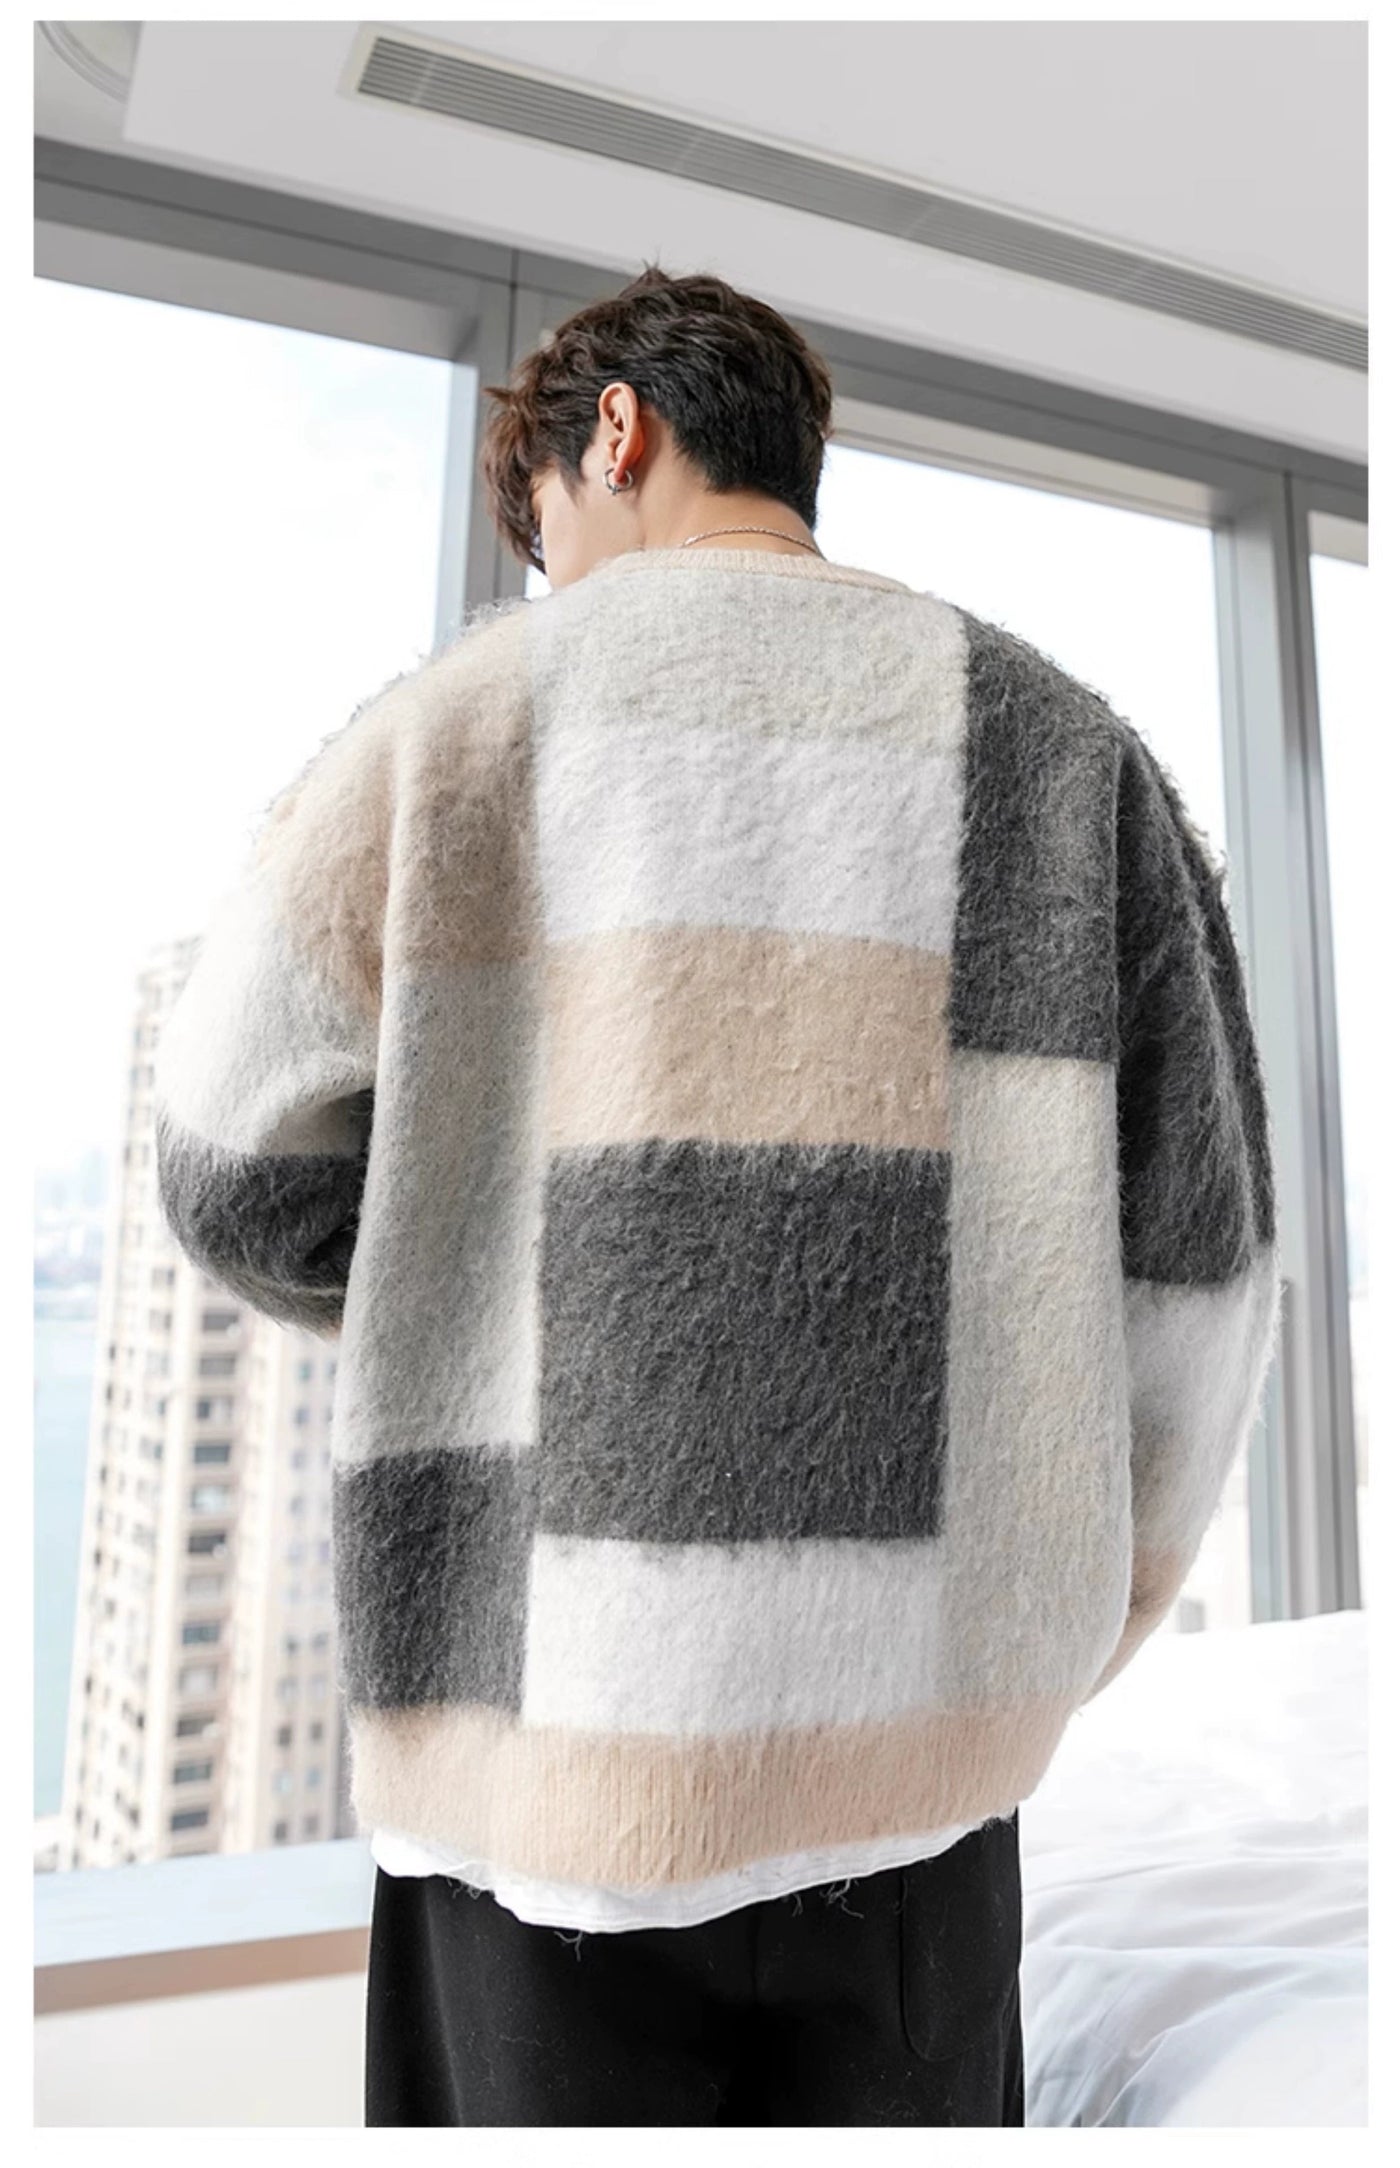 Chuan Fuzzy Stitched Contrast Sweater-korean-fashion-Sweater-Chuan's Closet-OH Garments